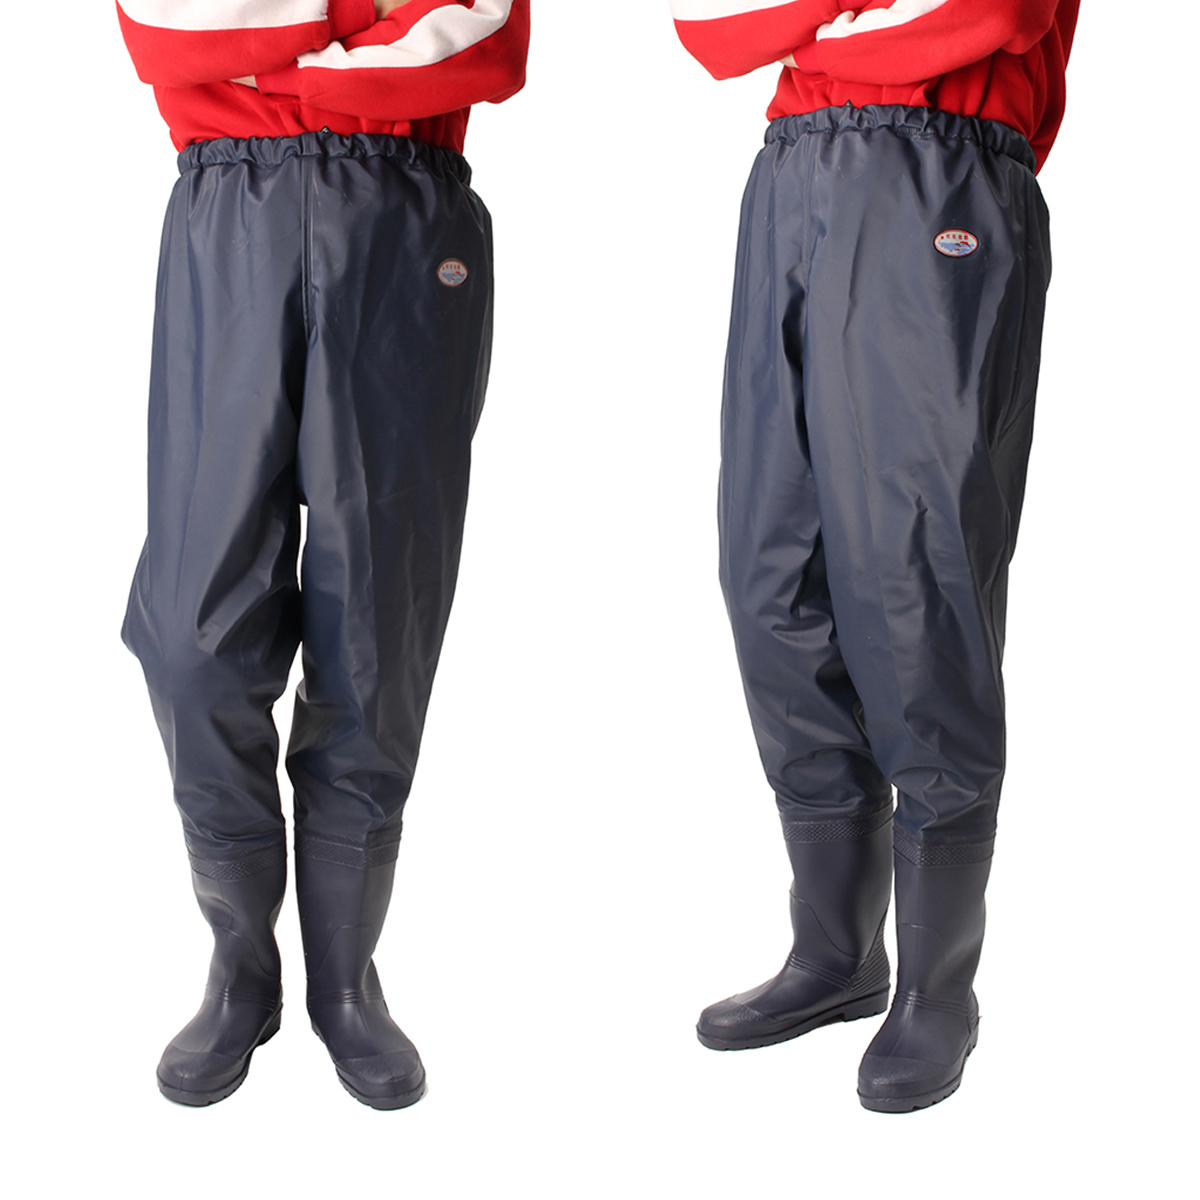 Unisex-Waist-Wading-Pants-Boots-Overalls-Waterproof-Hunting-Fishing-Pants-For-Catching-Fish-1259142-1